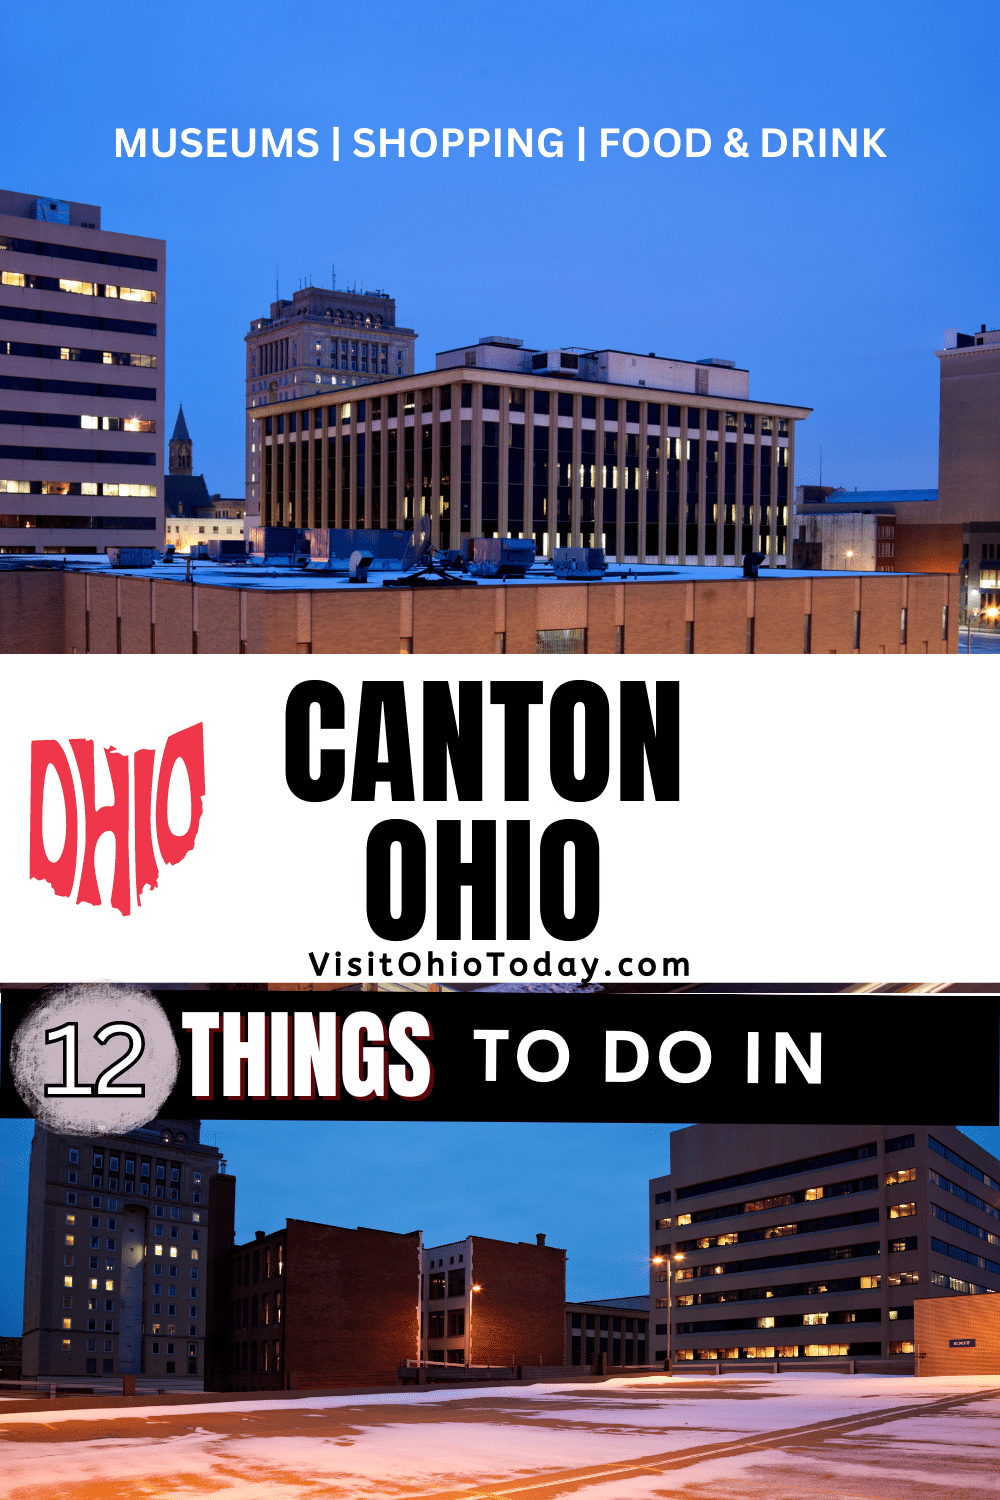 Canton has loads of things to do! Let us show you some of our top picks of things to do in Canton Ohio! | Things To Do In Canton Ohio | Canton Ohio | Stark County